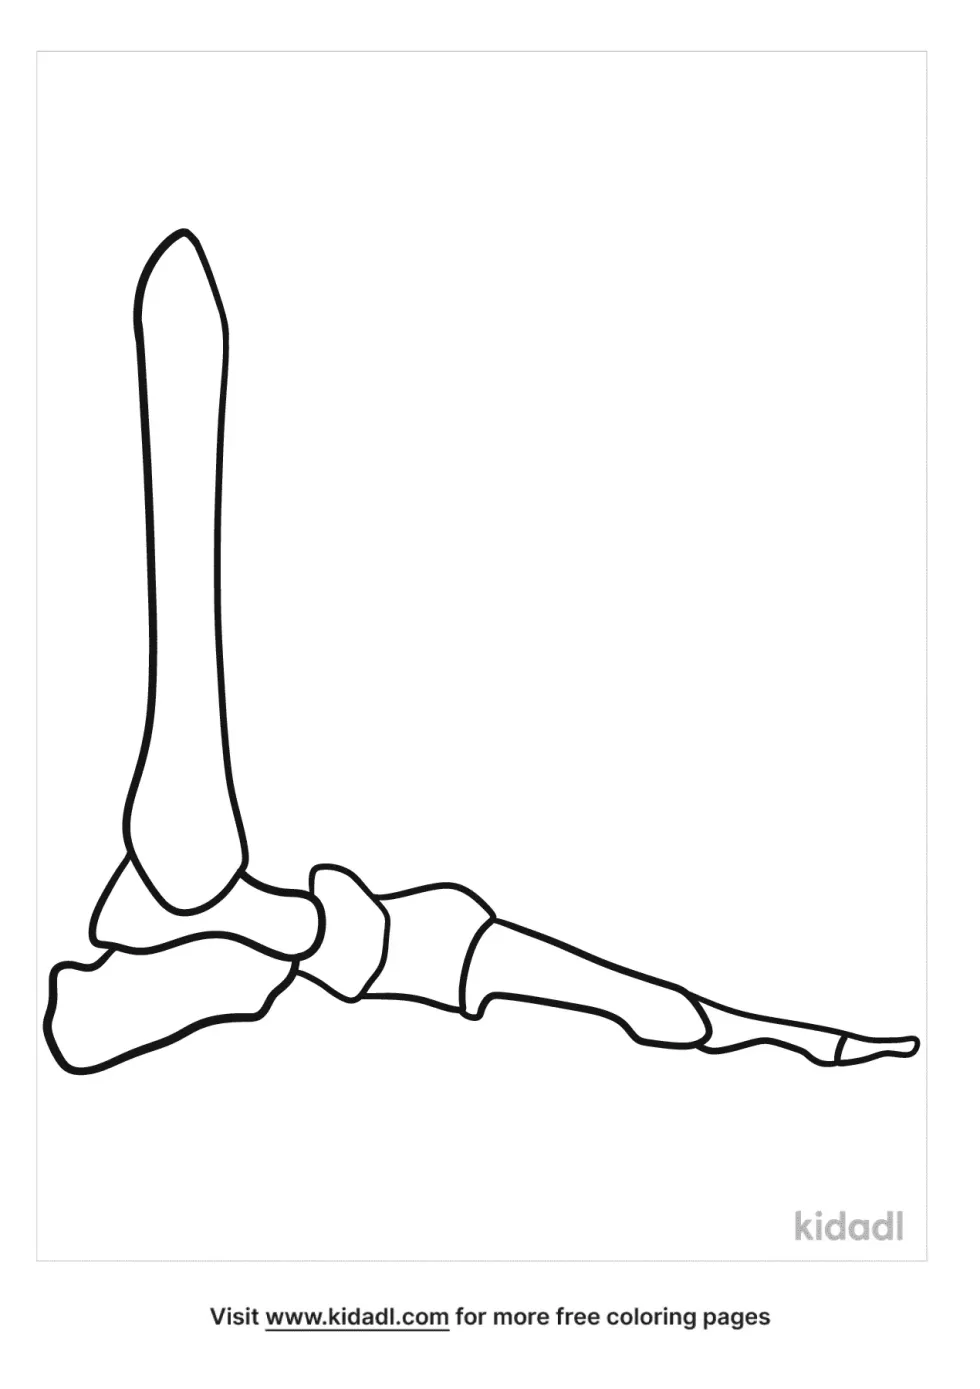 Lateral View Left Foot Bone